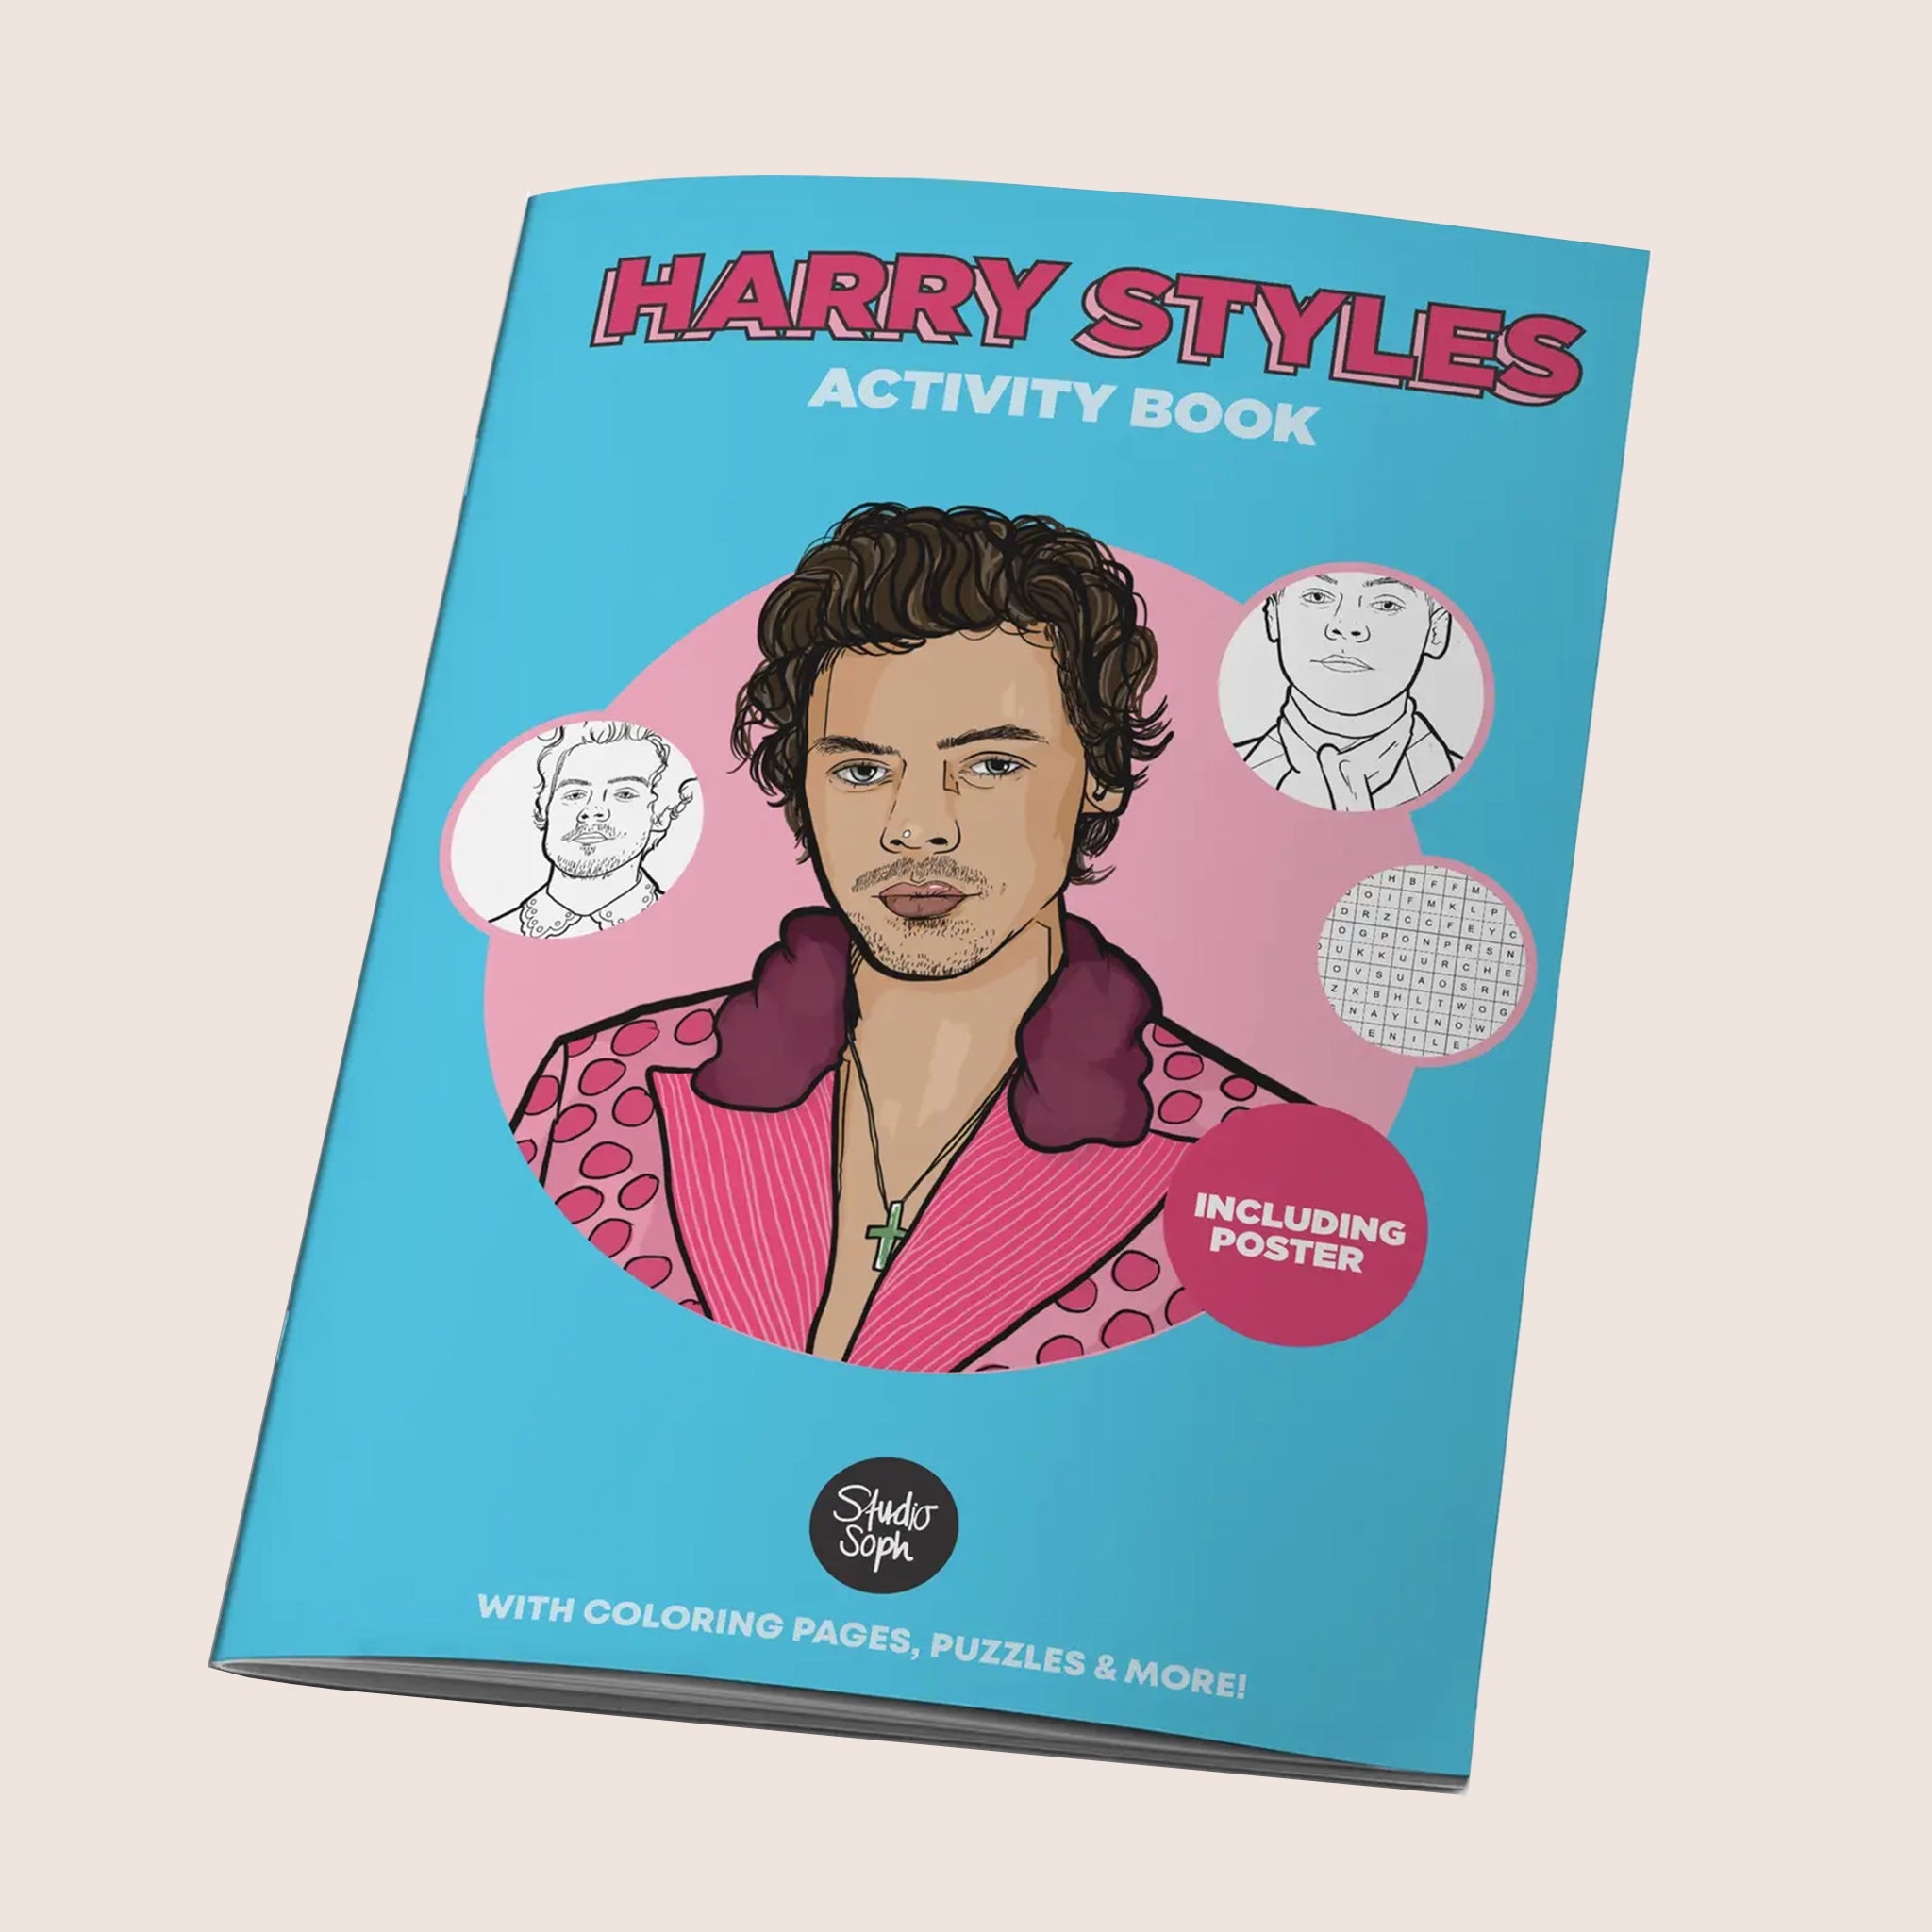 A blue coloring book with a graphic of Harry Styles in a pink polka dot suit along with pink text on the top that reads, "Harry Styles Activity Book".